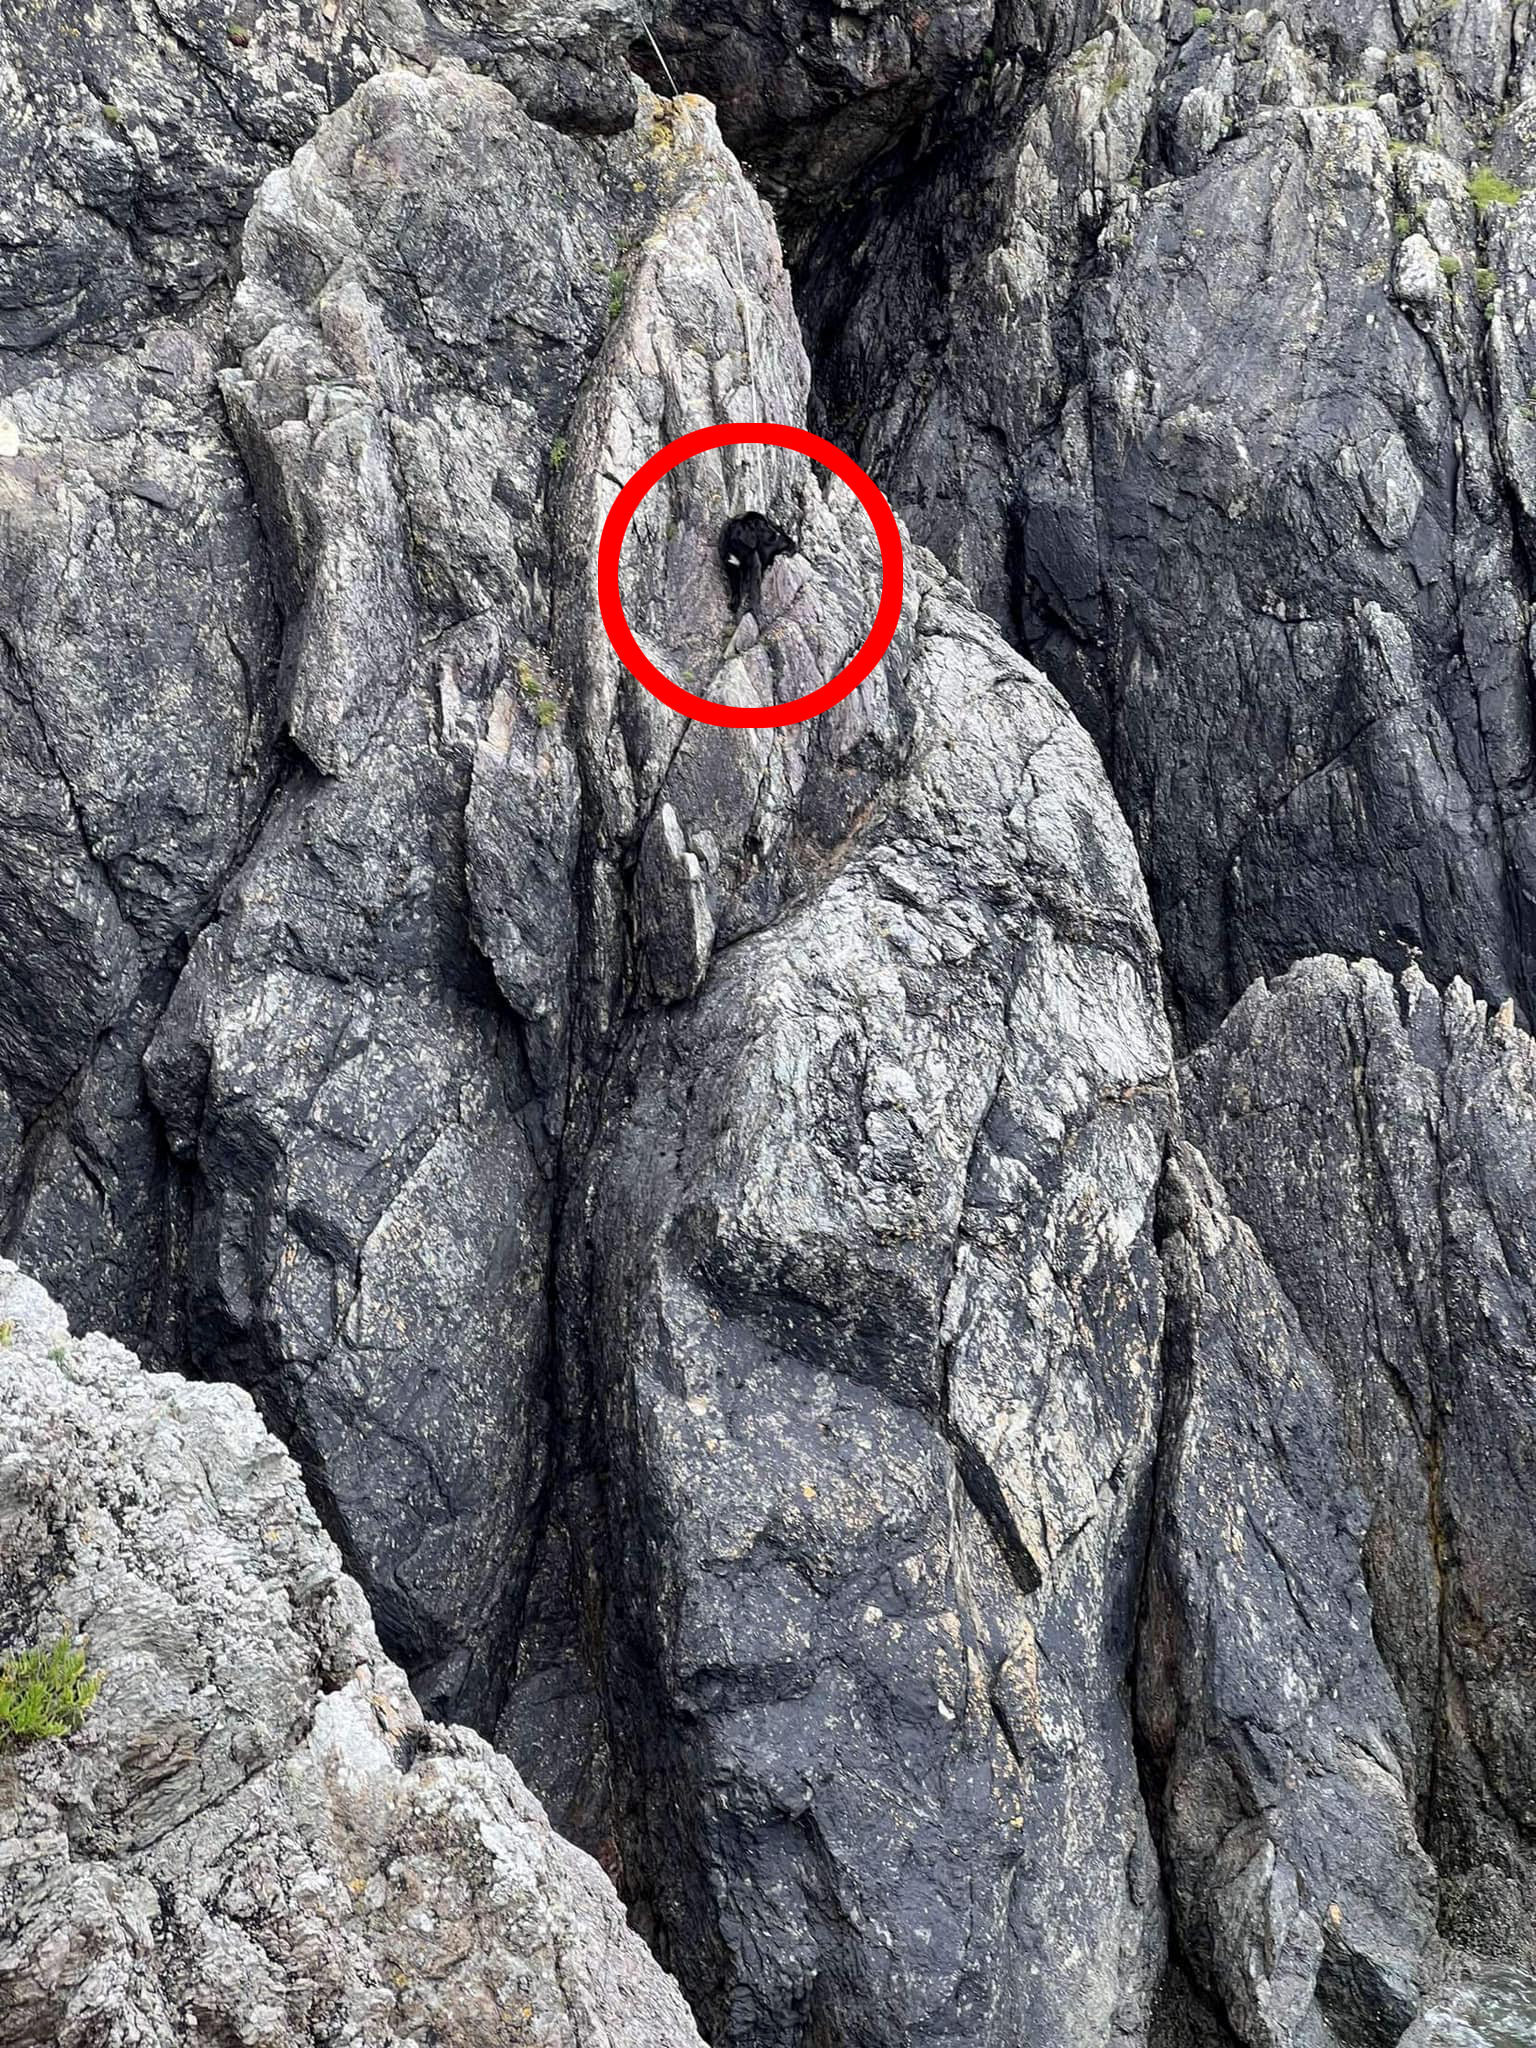 Peppa the dog. See SWNS story SWMRdog.A dog has been rescued from the side of a massive cliff where it was stuck - for 12 days. The pup, named Peppa, was wedged on the Llyn Peninsula in Gwynedd, Wales.Coastguard were notified after a fisherman and two